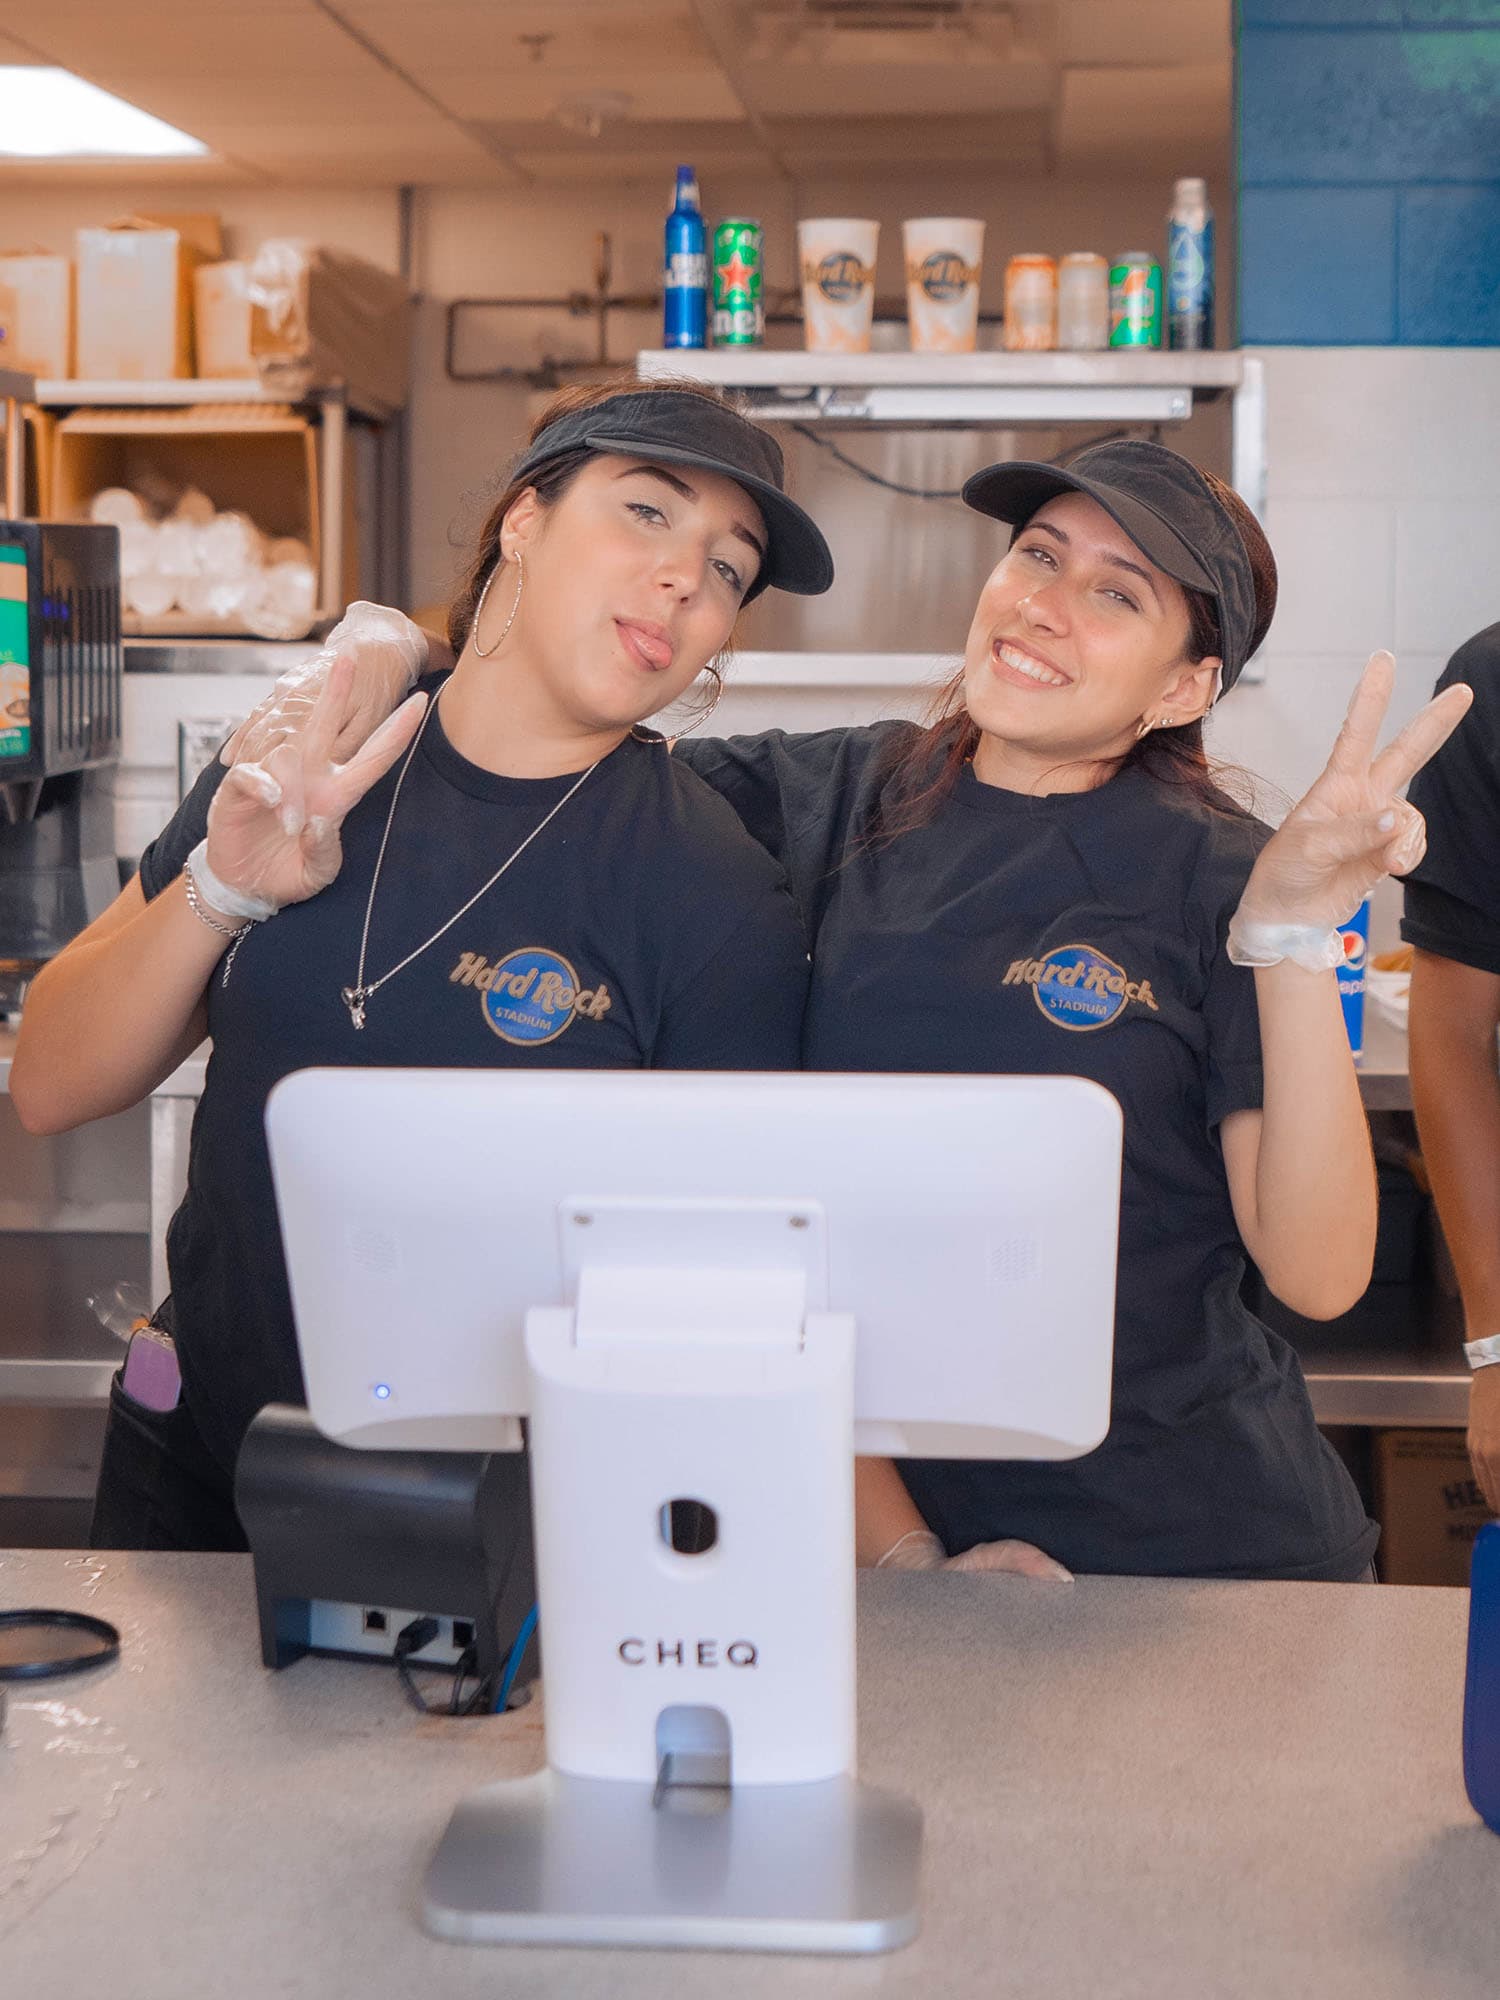 Two workers displaying peace signs in behind CHEQ Point of Sale Kiosk